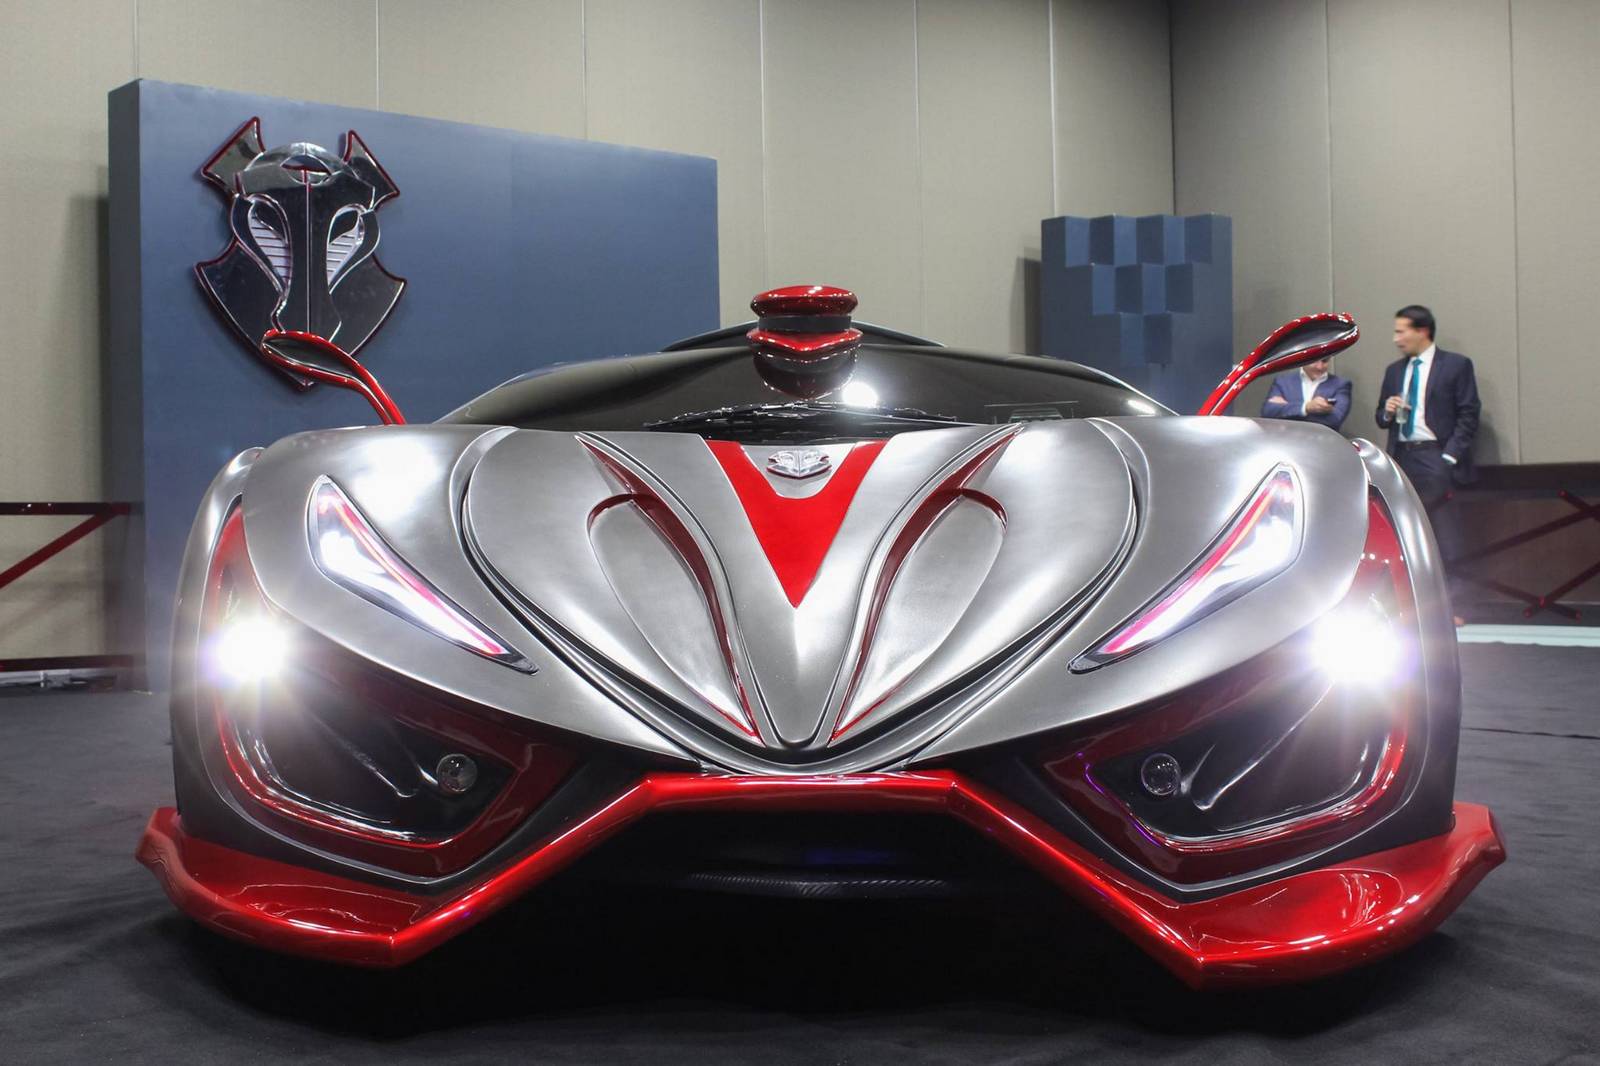 Inferno supercar front view